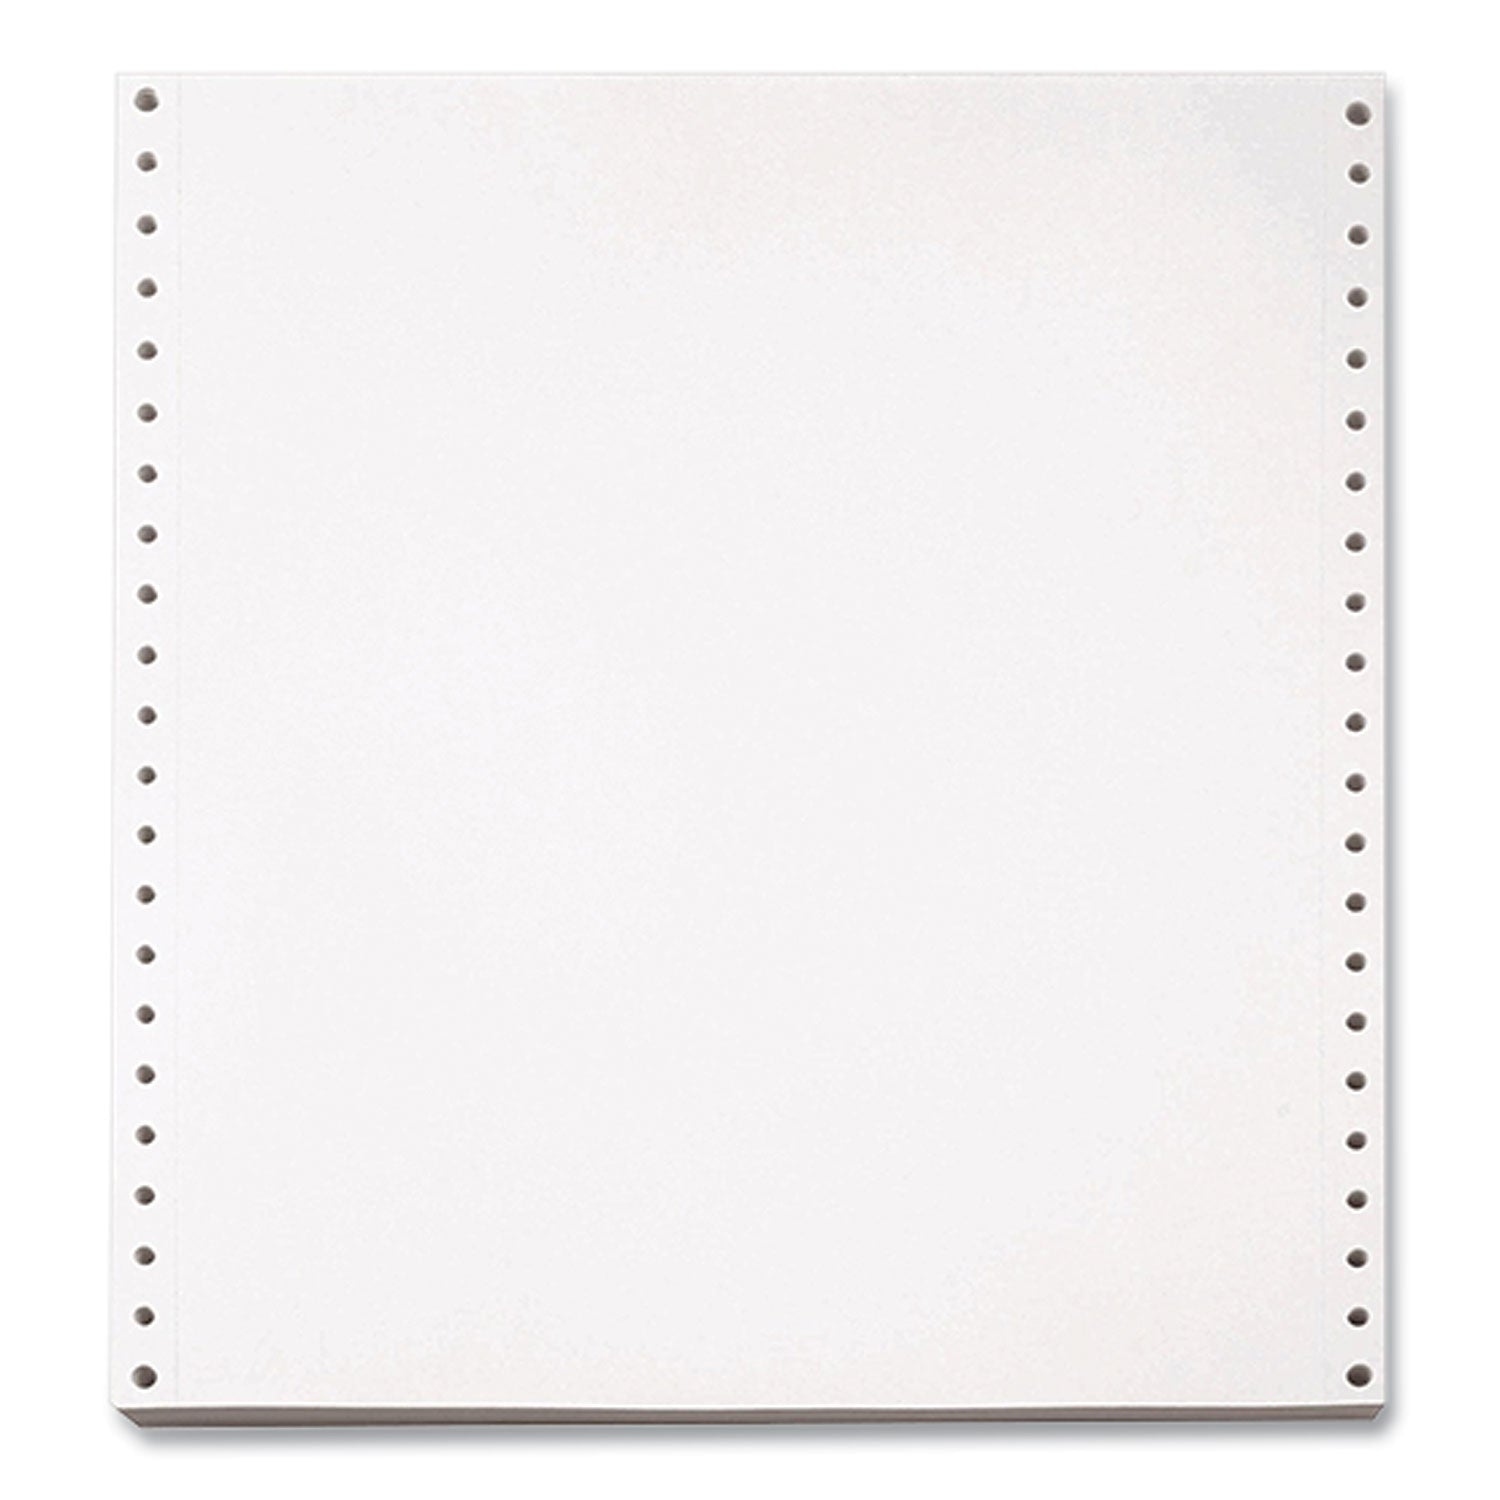 blank-continuous-paper-1-part-20-lb-bond-weight-95-x-55-white-5400-carton_wll955027 - 1